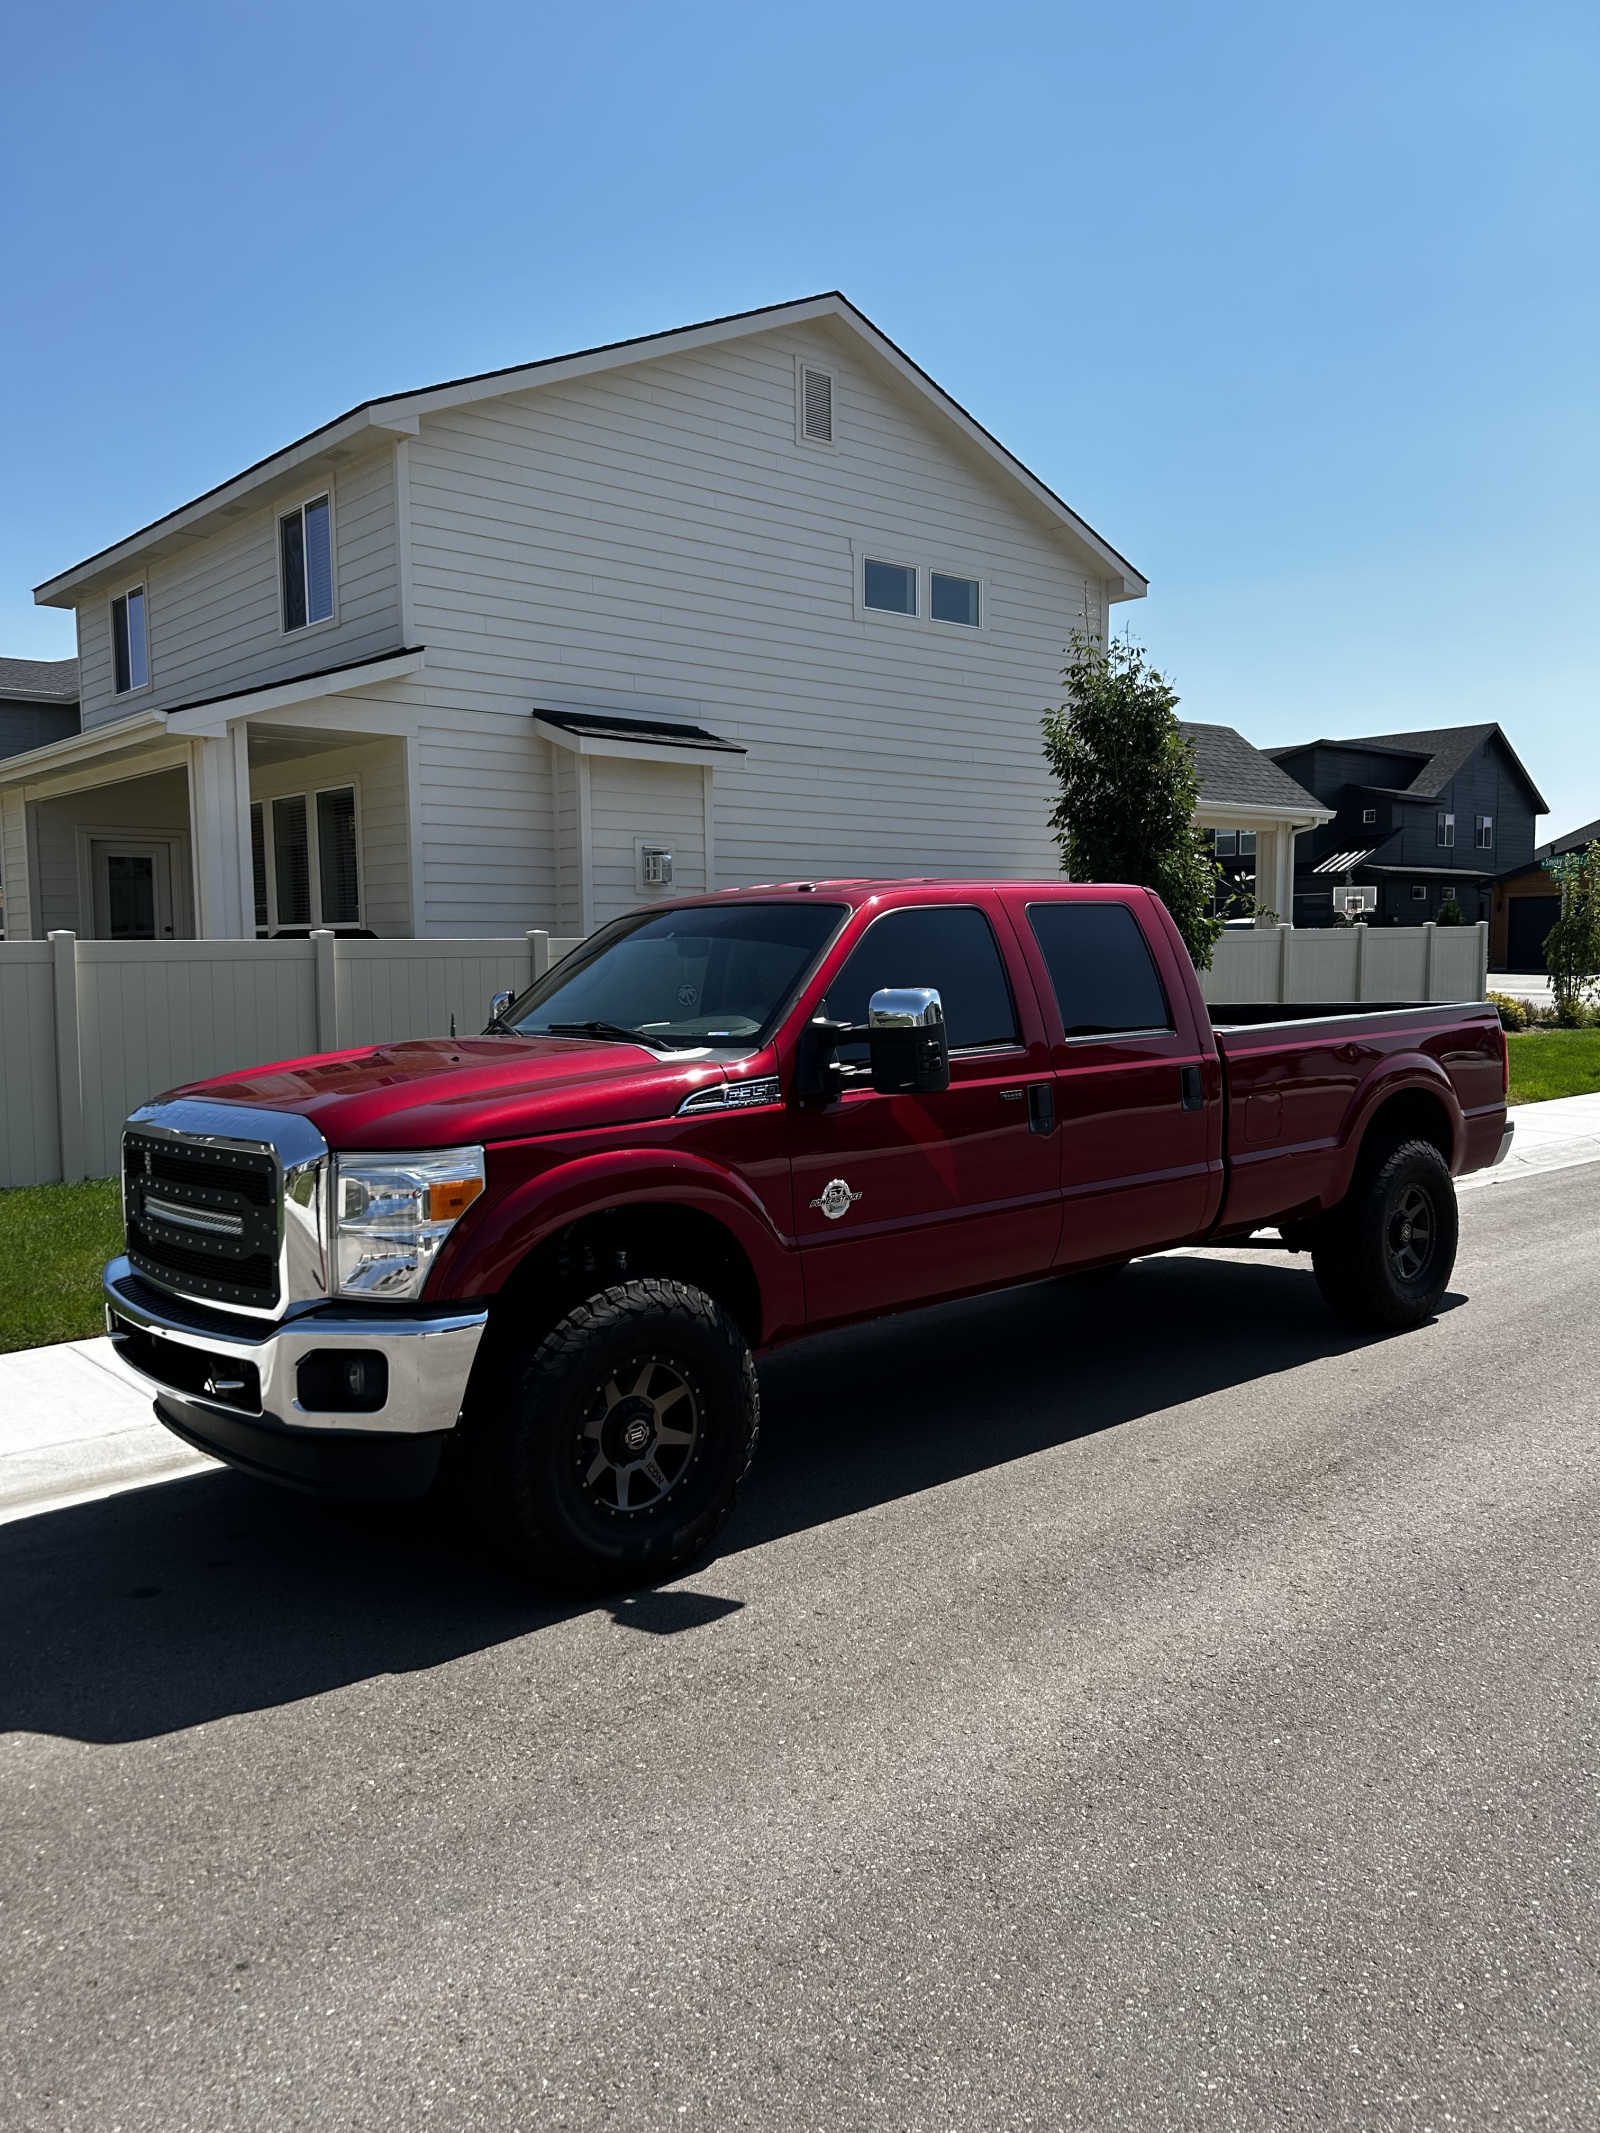 For Sale: Ford F350 Diesel 4x4 Coilover Conversion - photo1